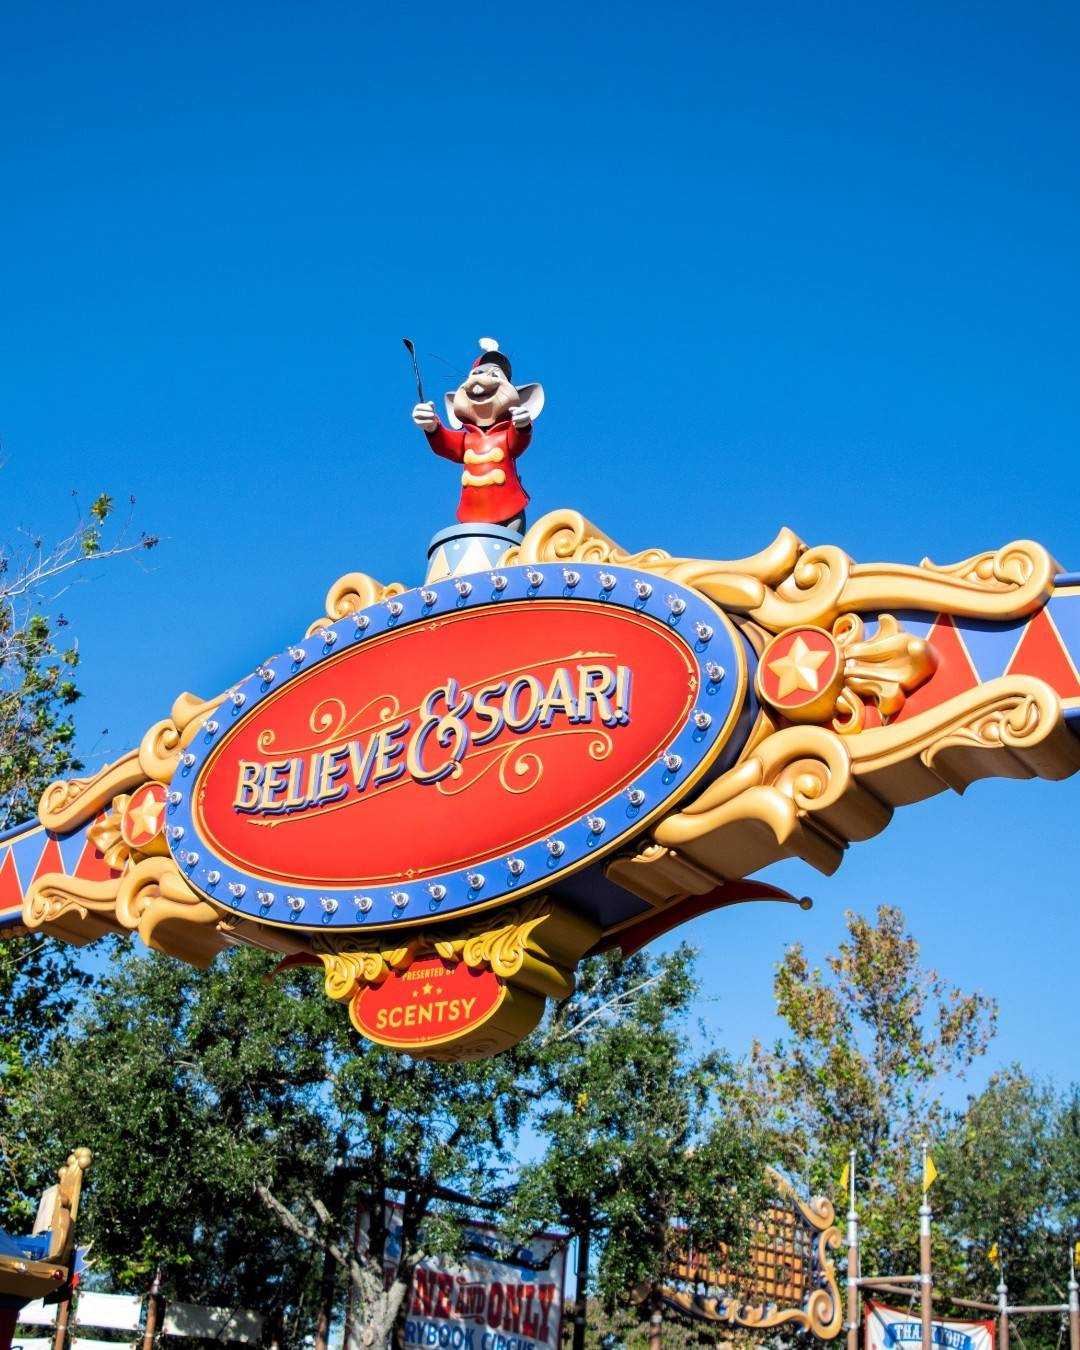 Scentsy logo added to Dumbo attraction as part of 'Smellephants on Parade' coming to Fantasyland at Magic Kingdom